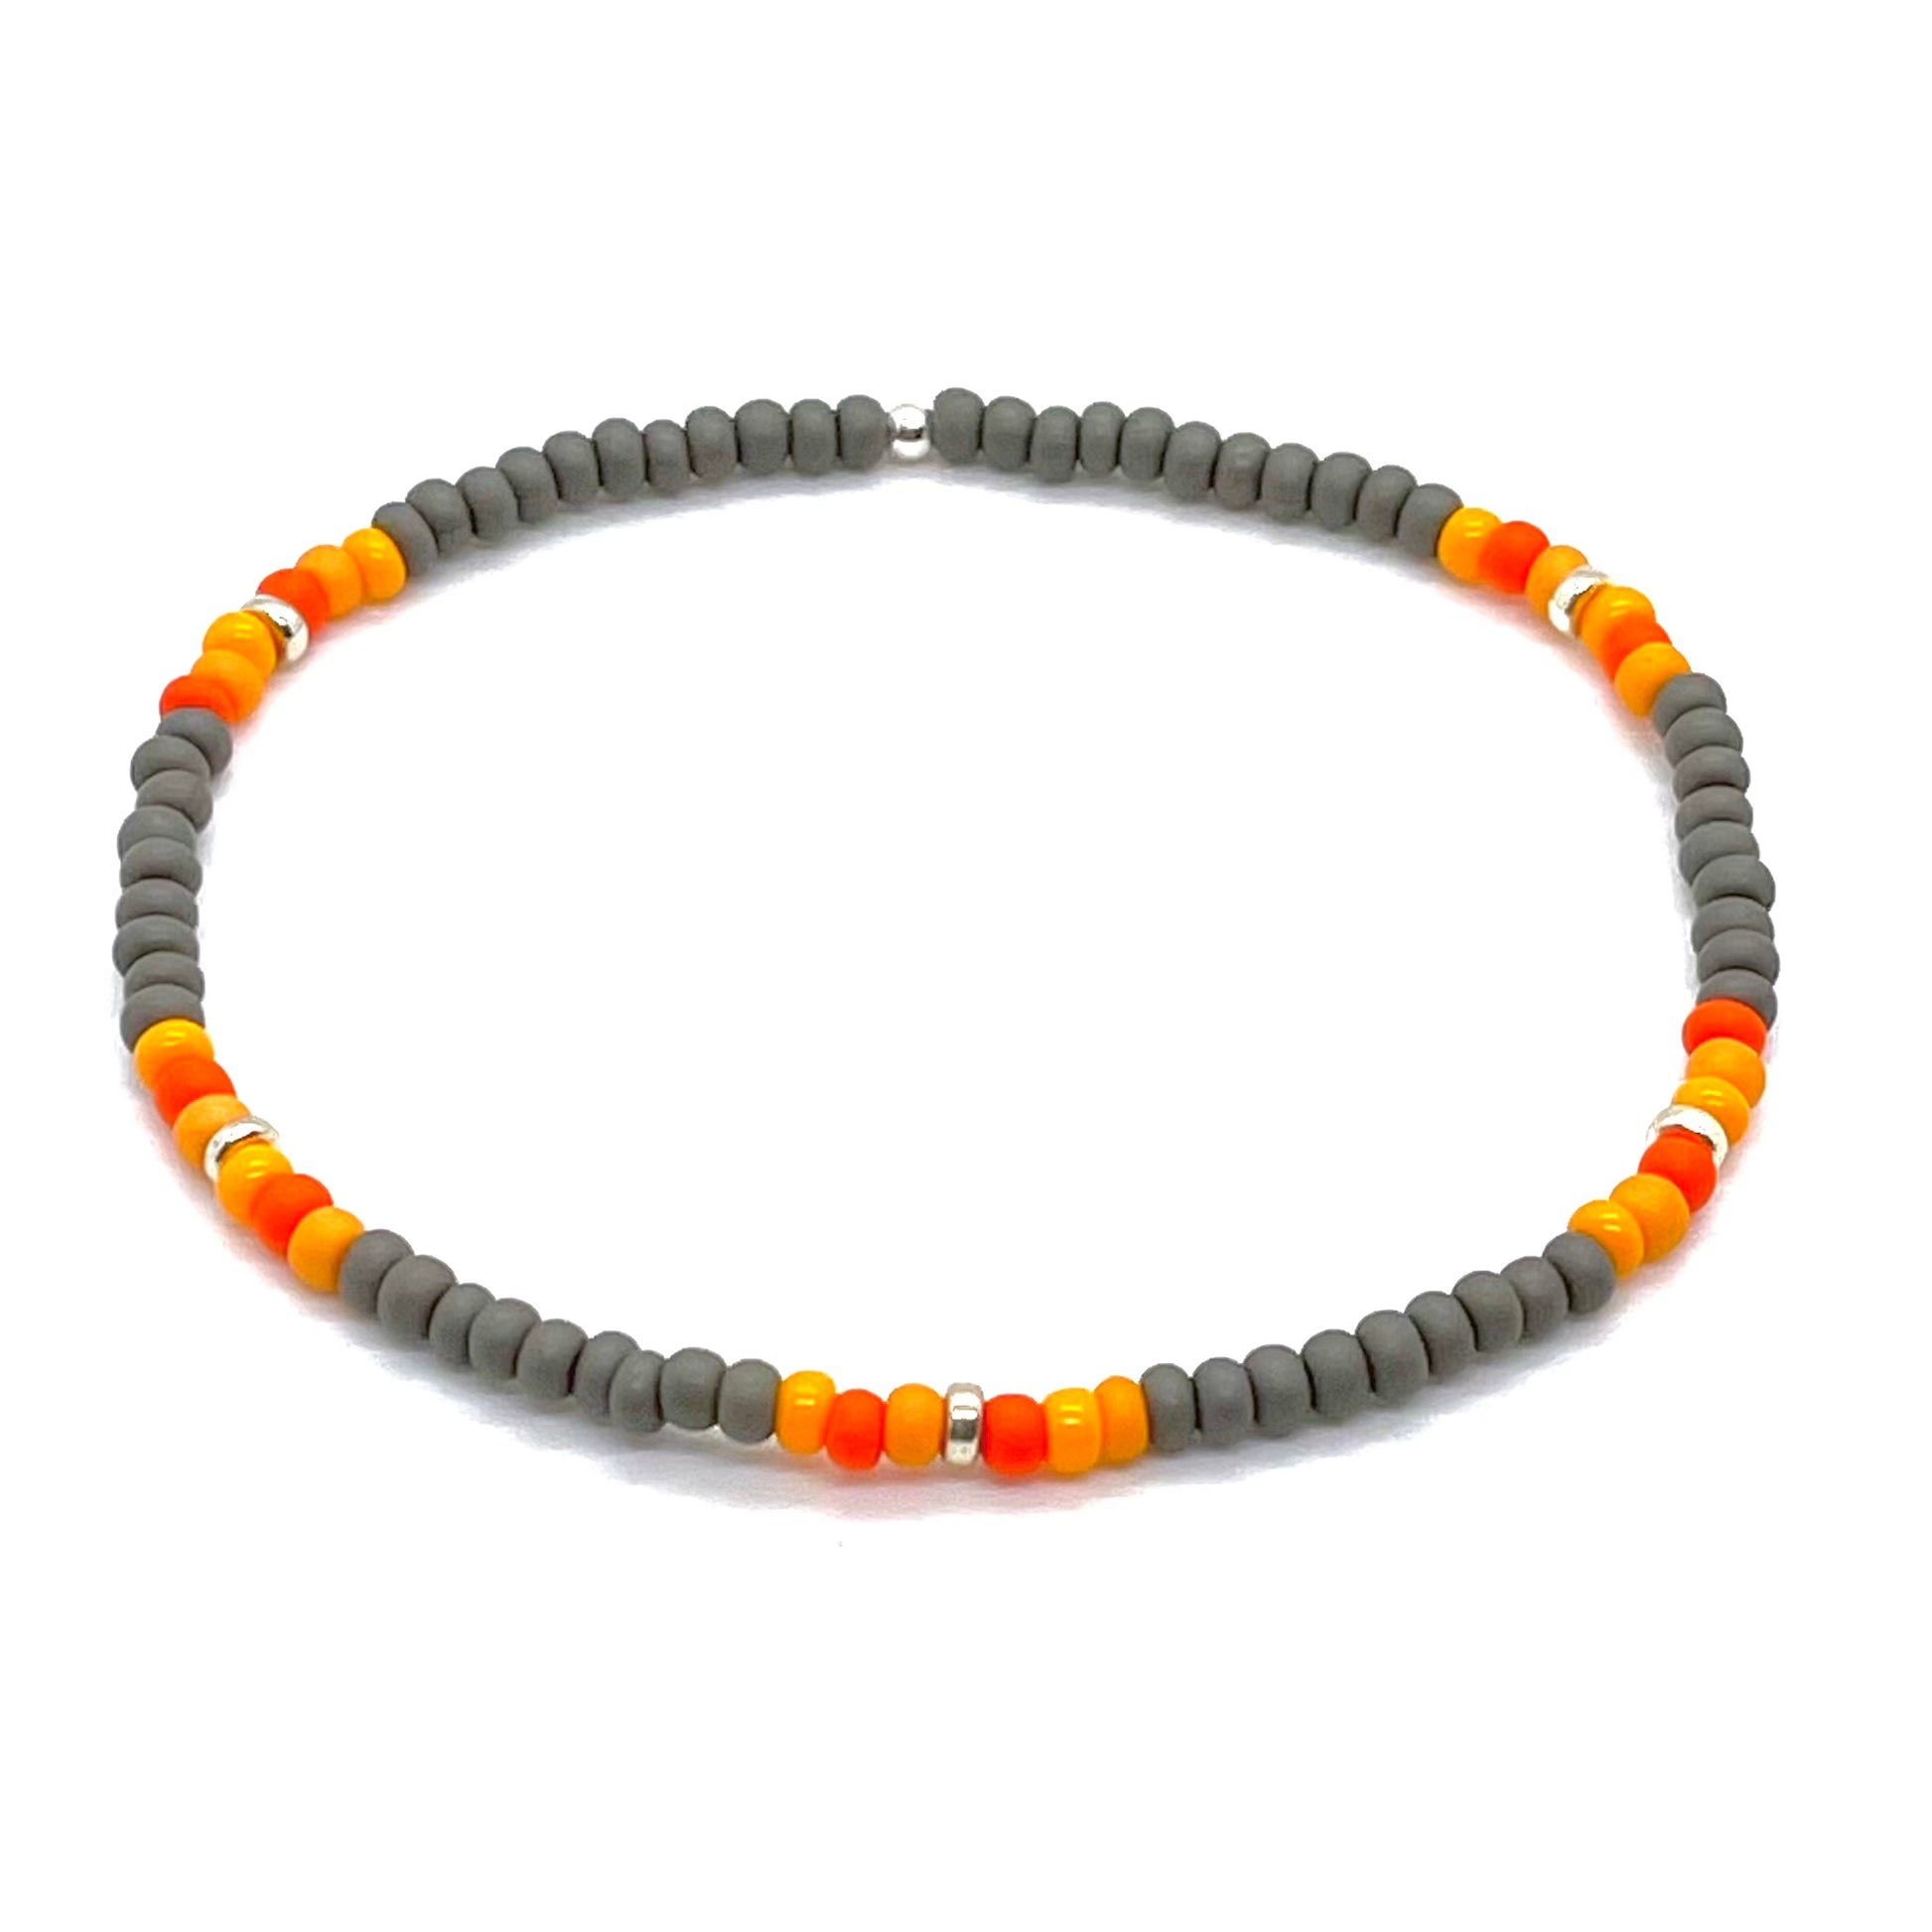 Orange men's bracelet with small gray taupe and silver-tone seed beads. Thin stretch bracelet. Waterproof.